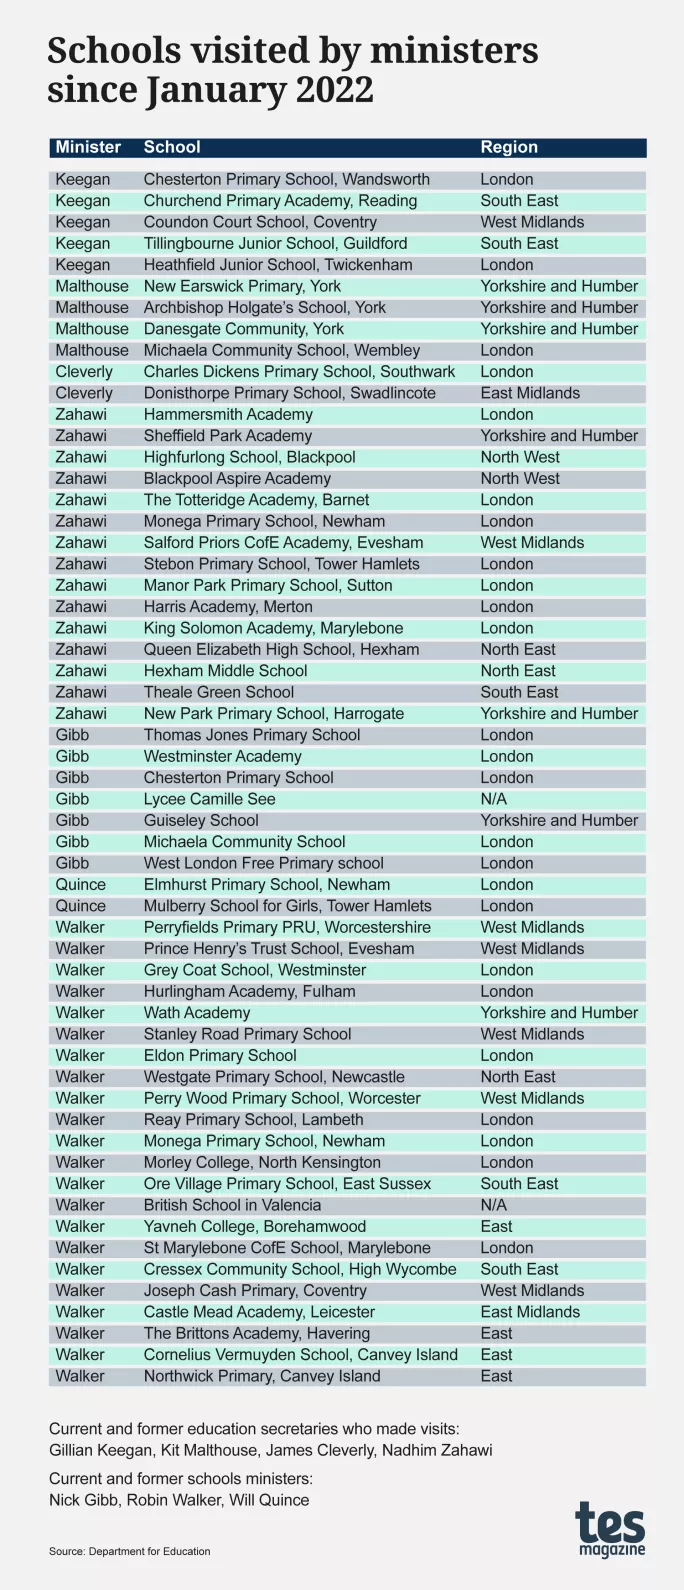 Schools visited by DfE ministers since January 2022